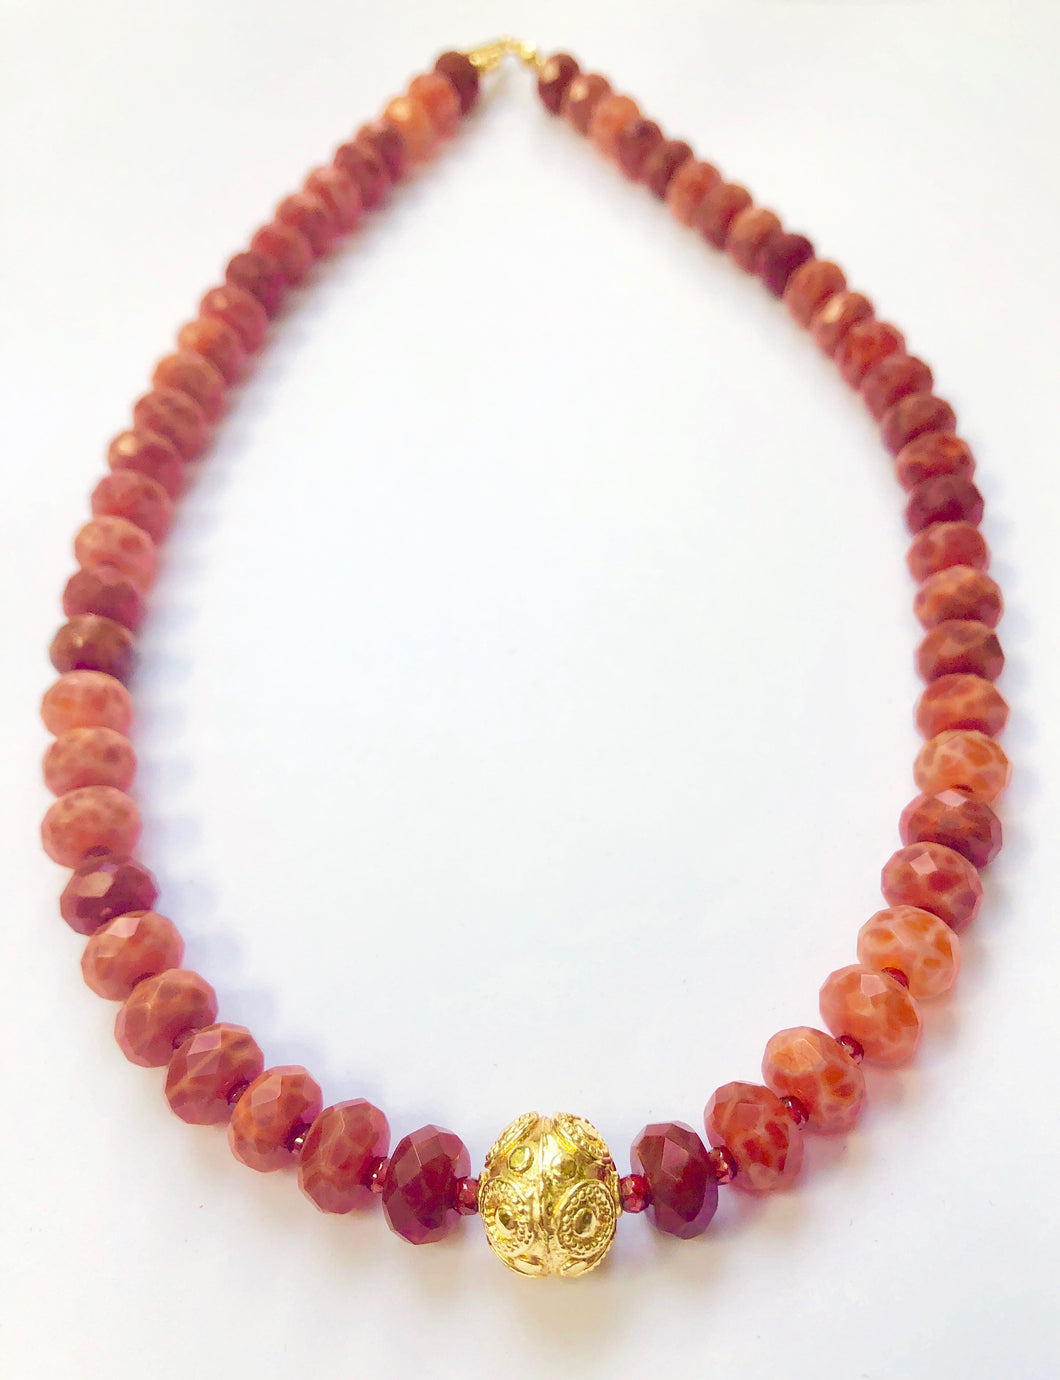 Perfect for Cool Weather! A Fire Agate and Garnet Necklace